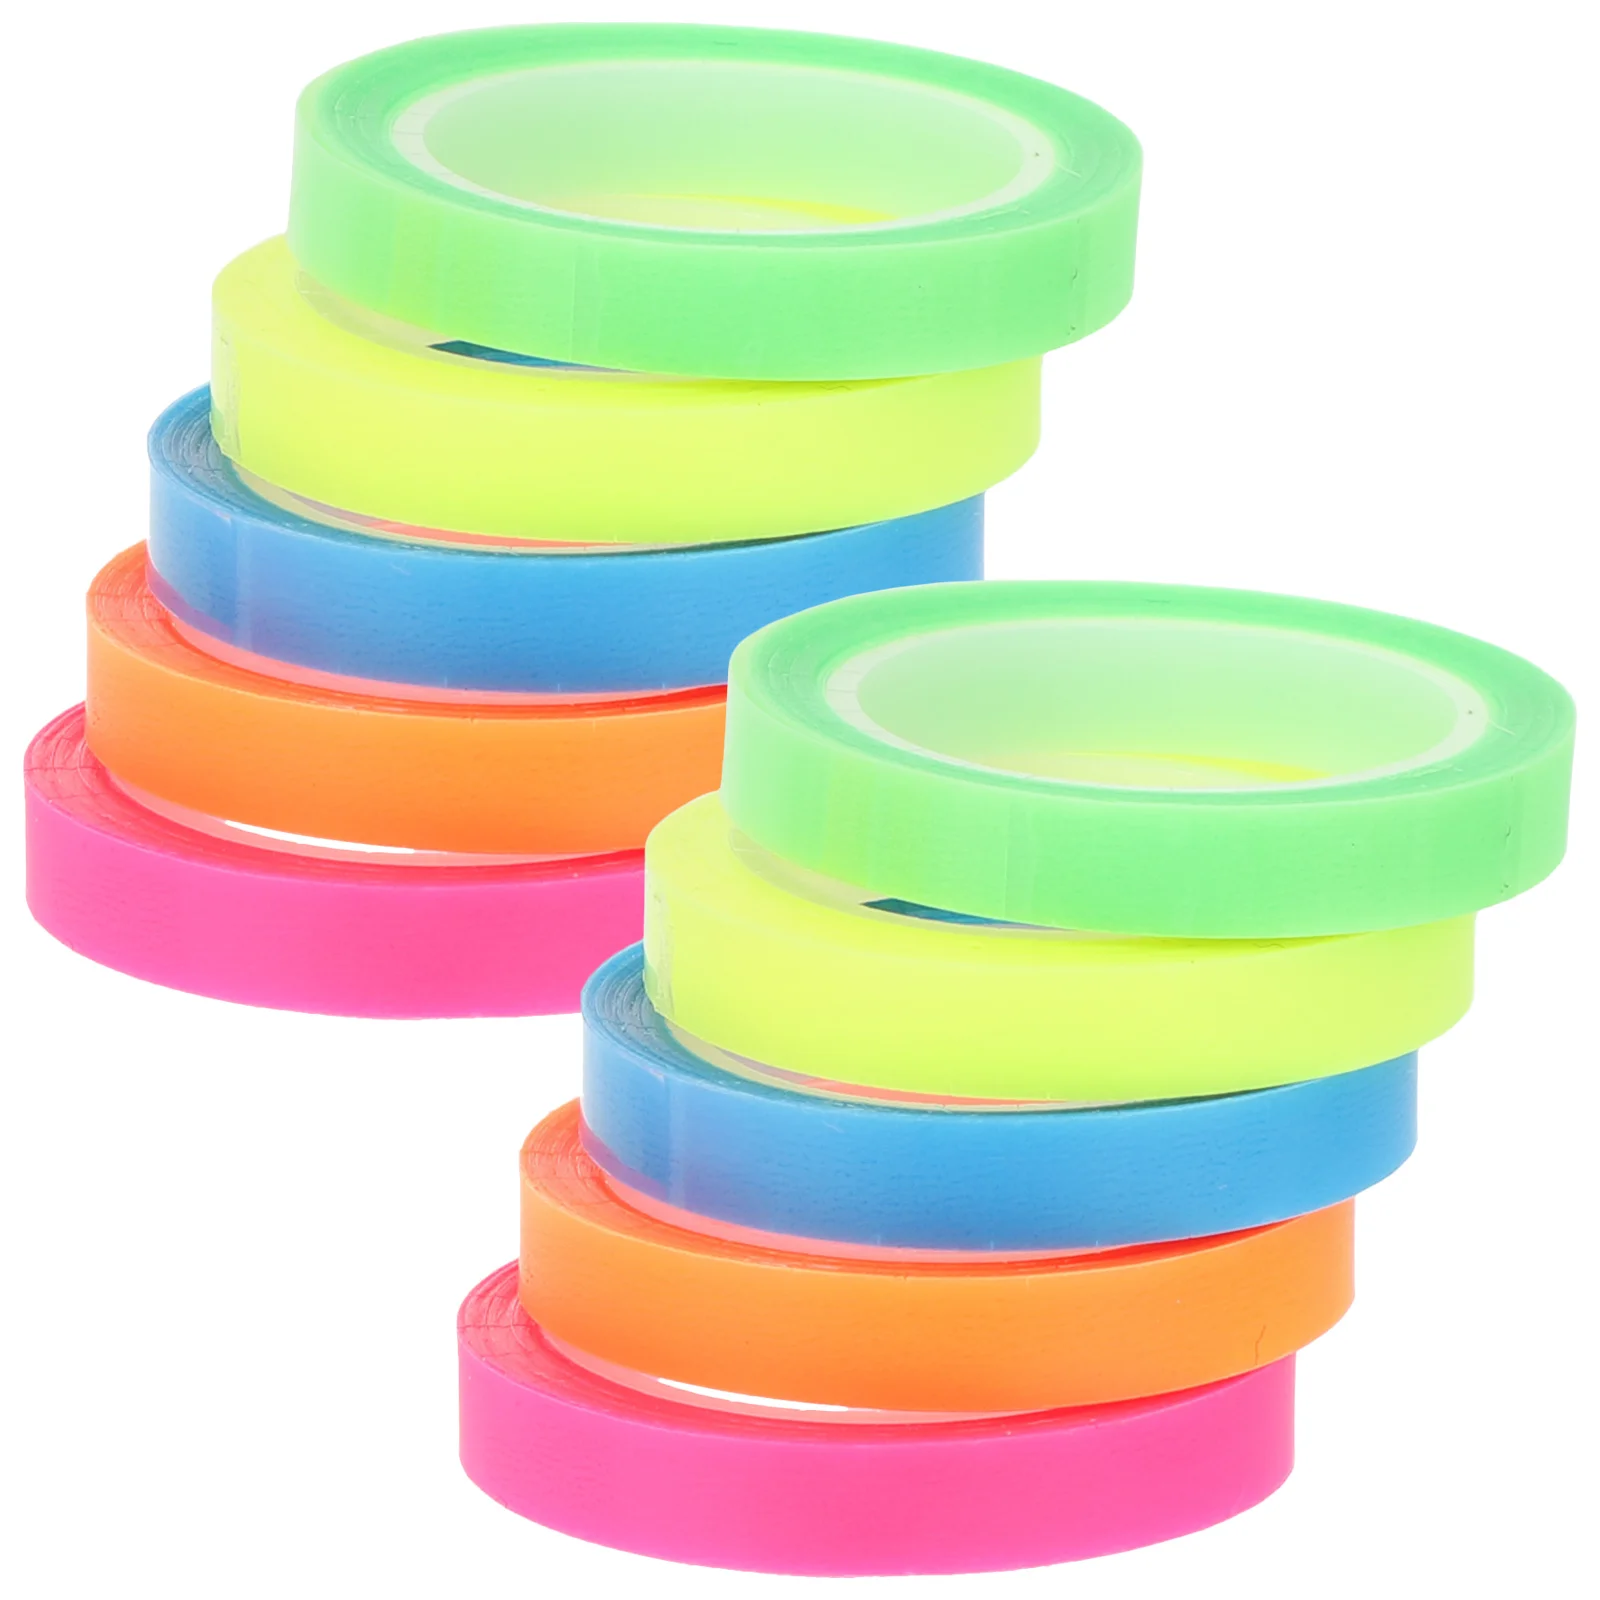 

10 Rolls Waterproof Index Sticker Pinstriping Tape Neon Page Marker Tearable Page Markers Tabs The Pet Sticky Tabs Books